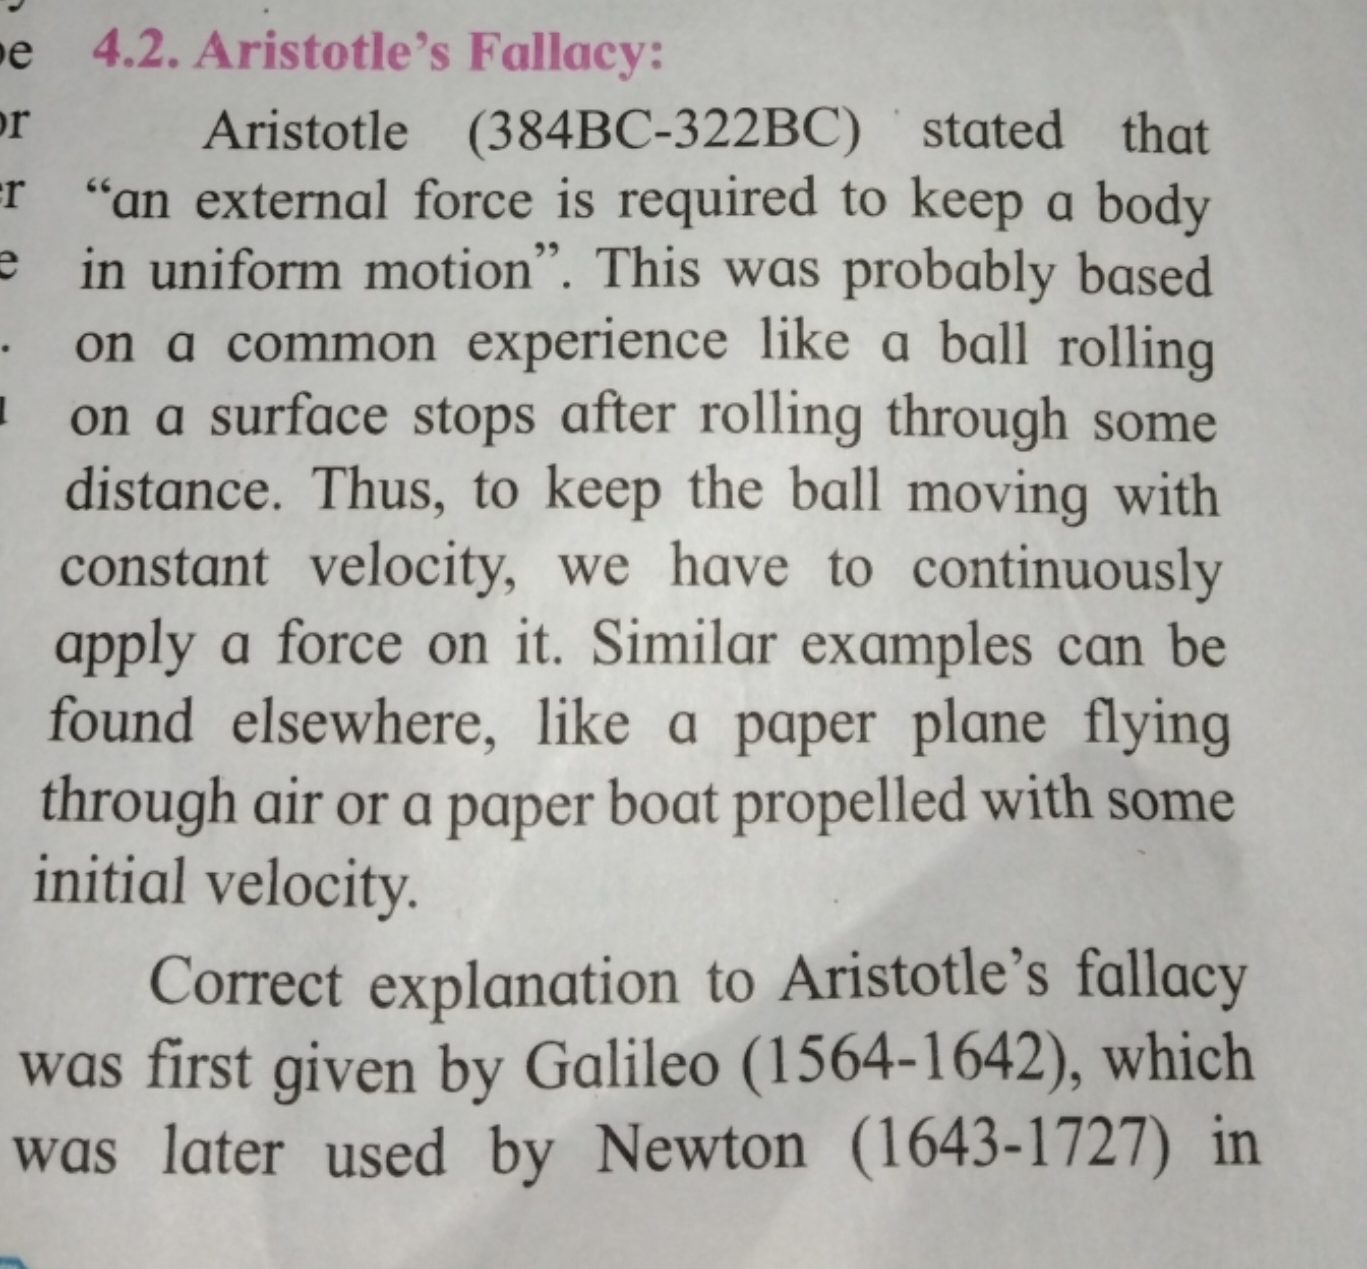 4.2. Aristotle's Fallacy:
Aristotle (384BC-322BC) stated that "an exte